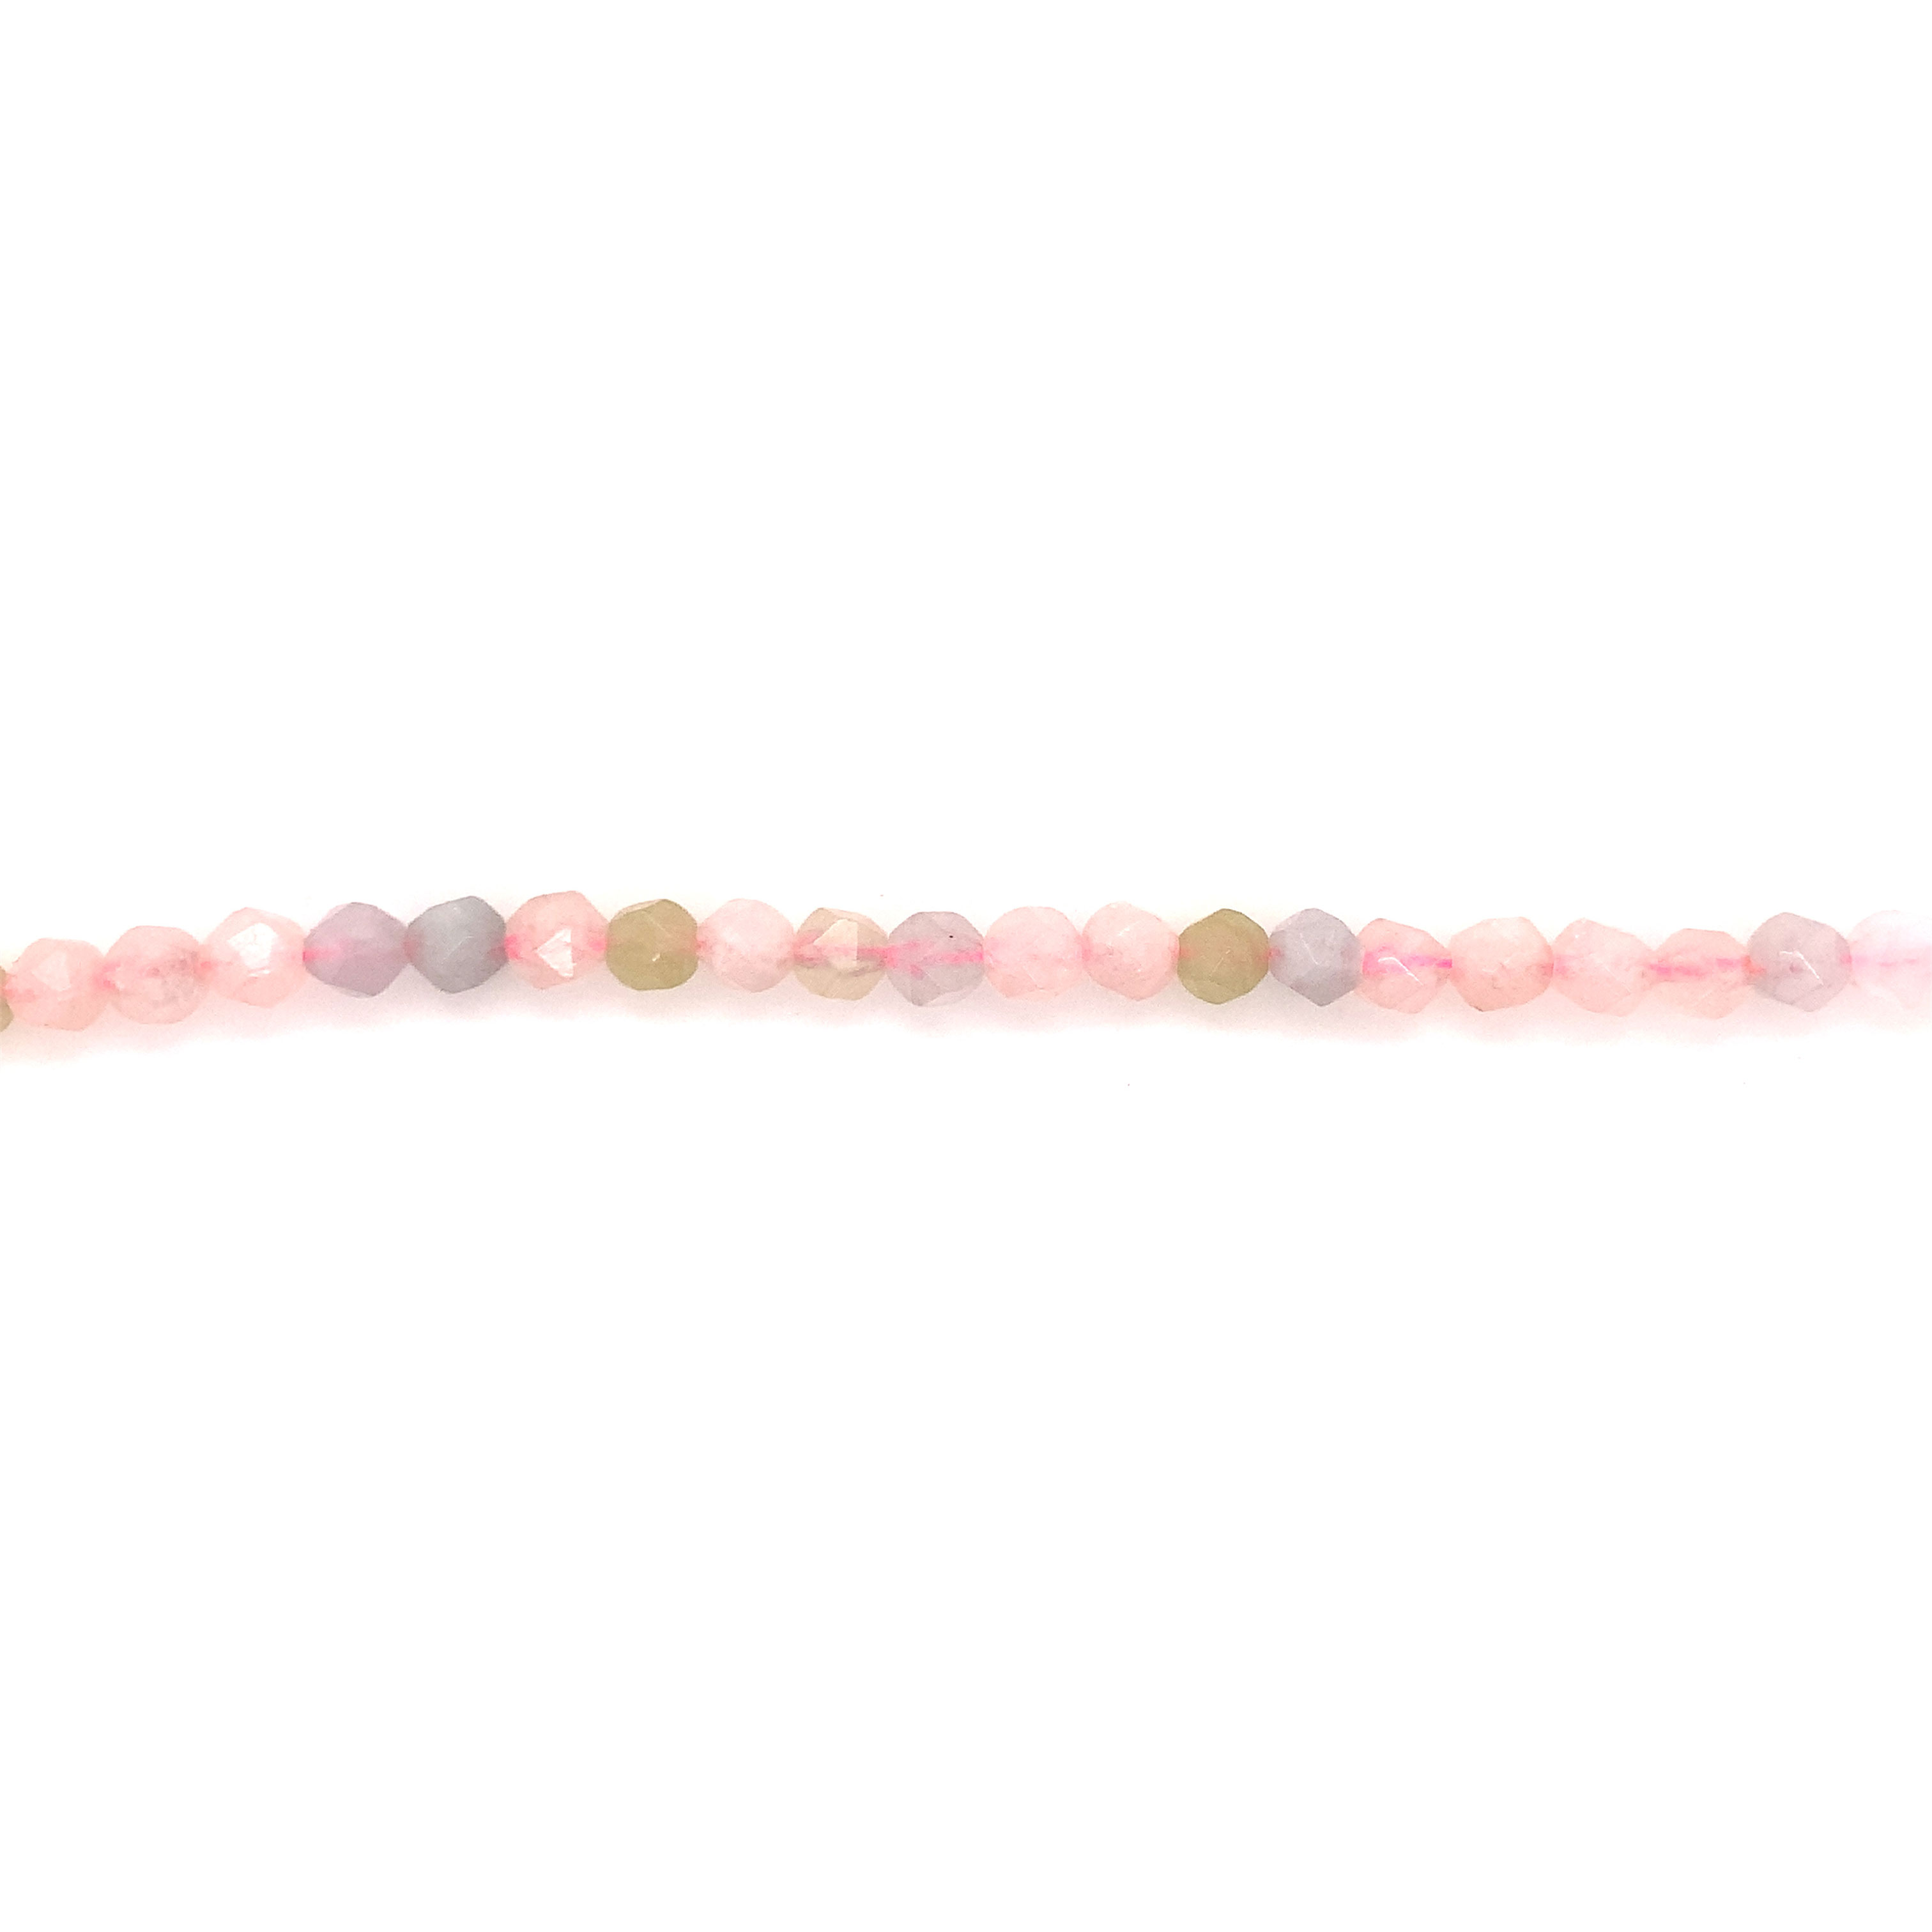 6mm Beryl Beads - Faceted